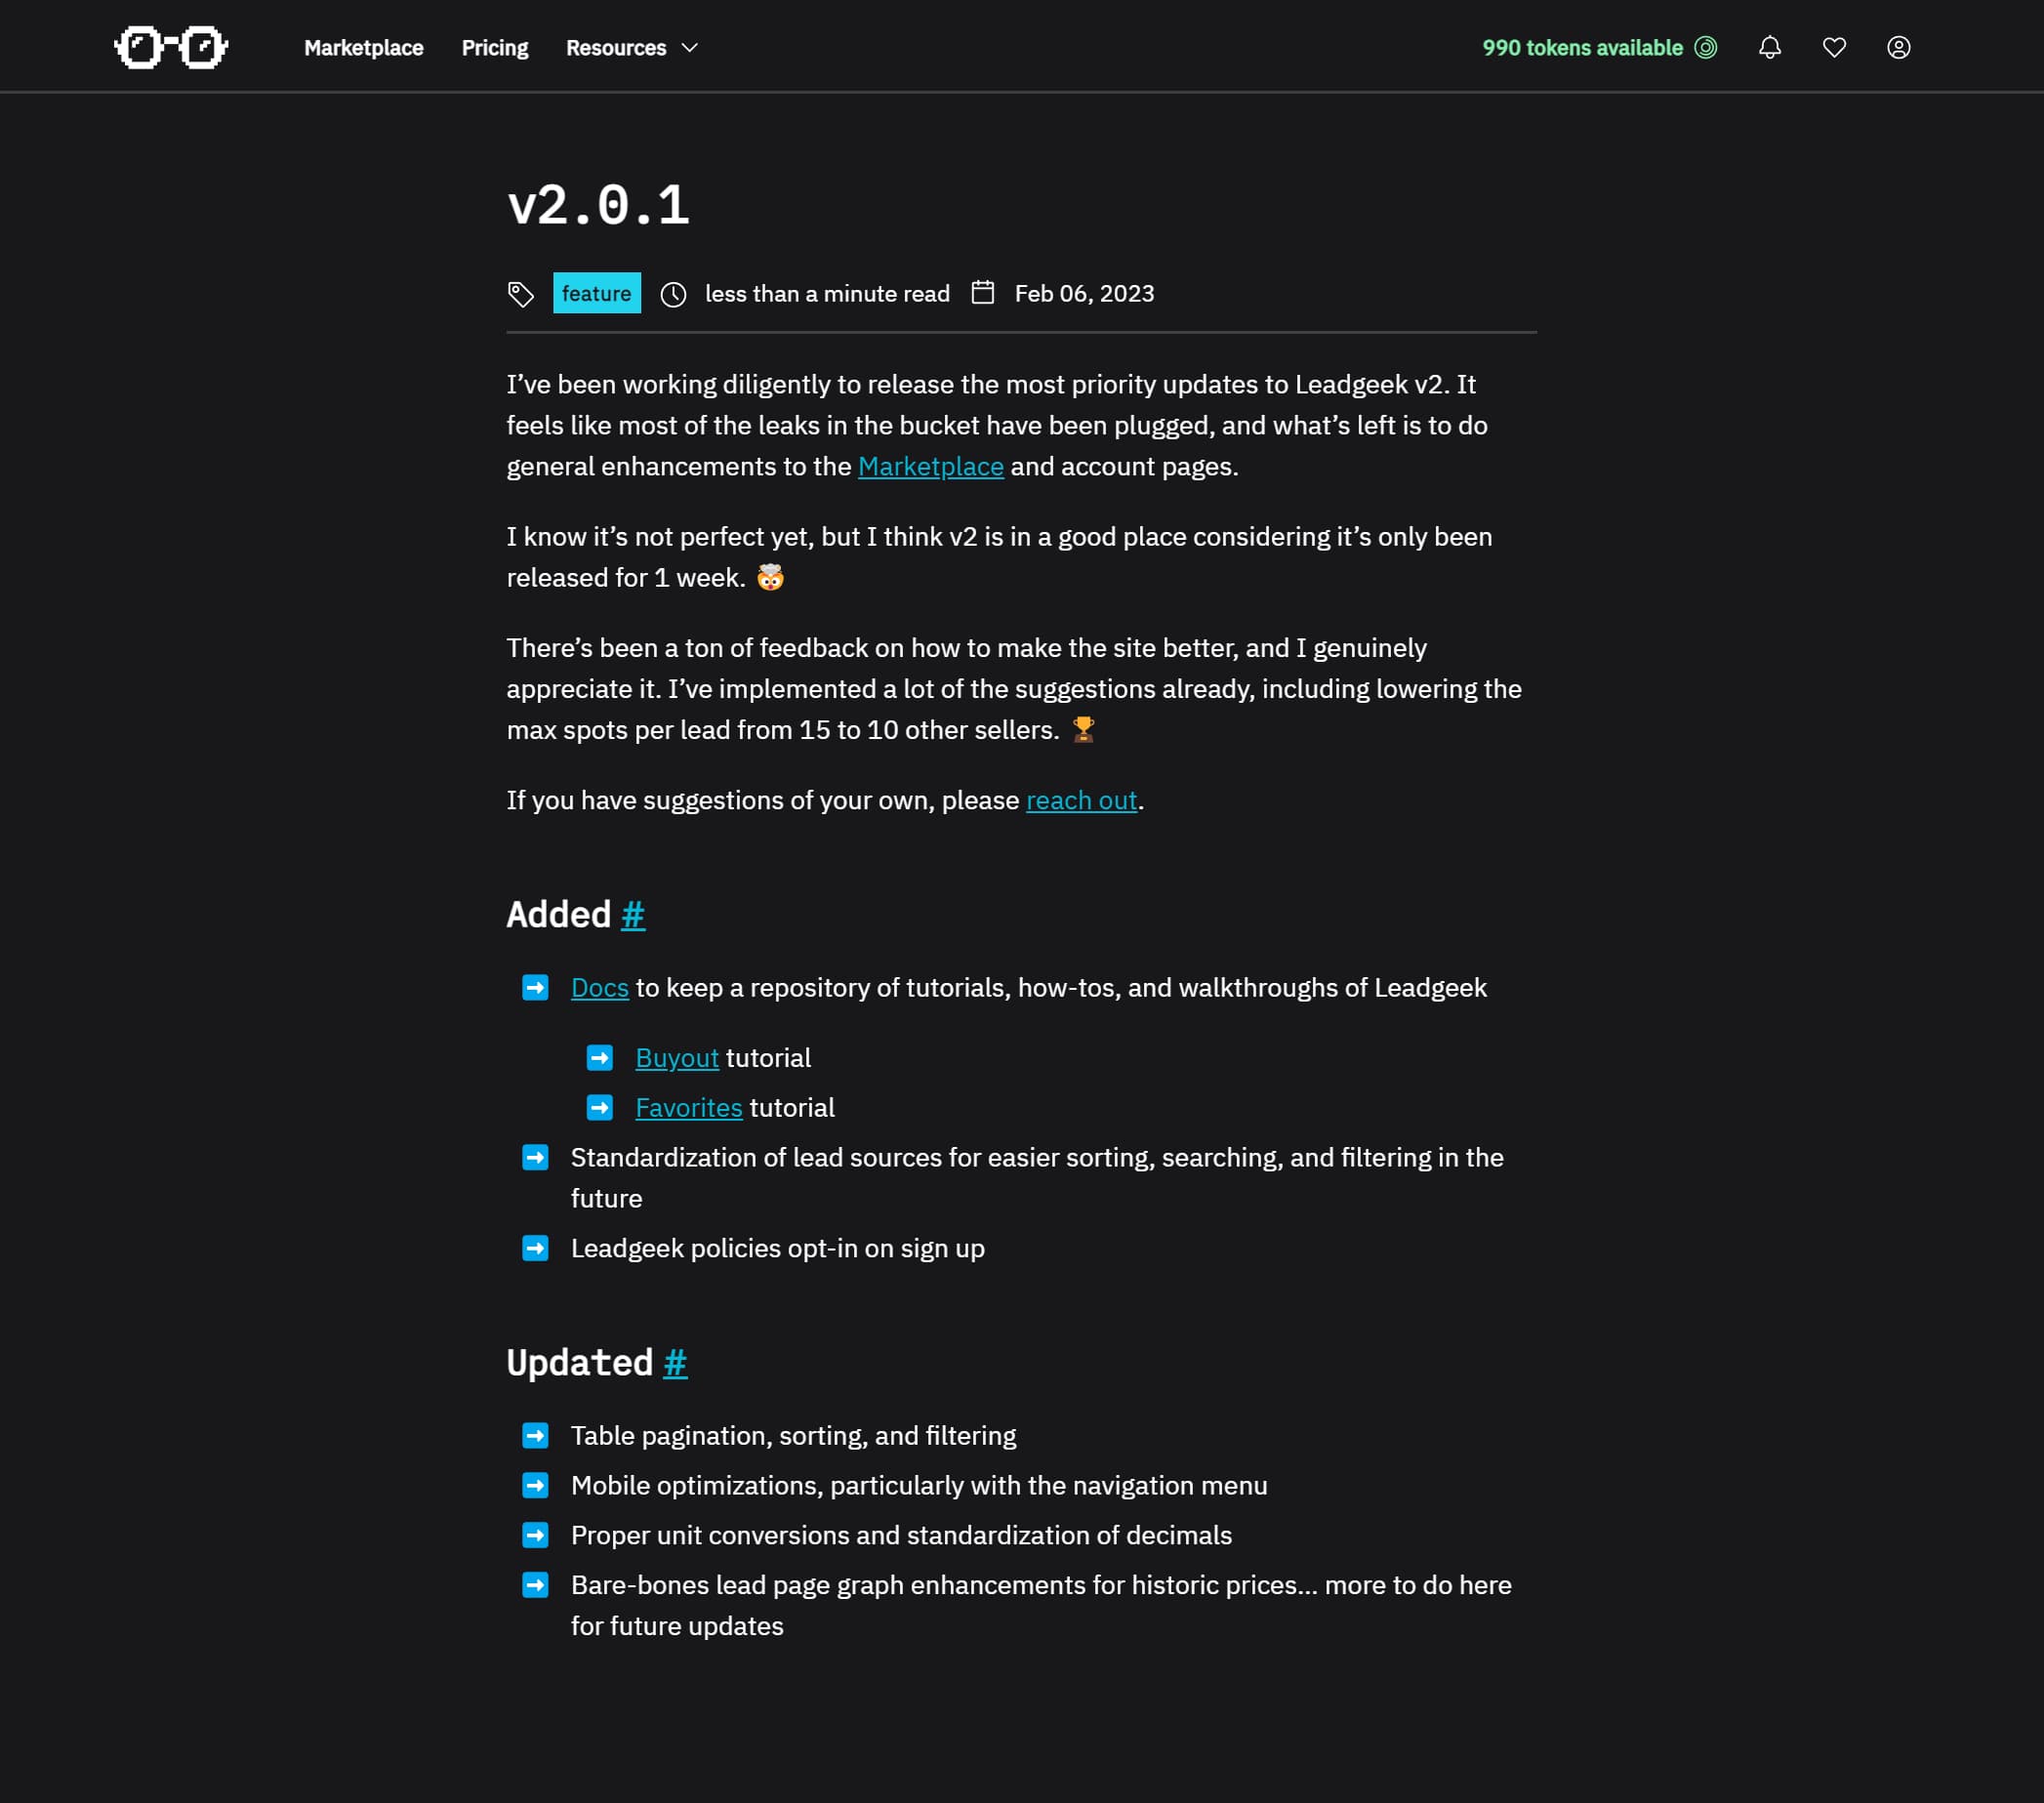 A changelog example